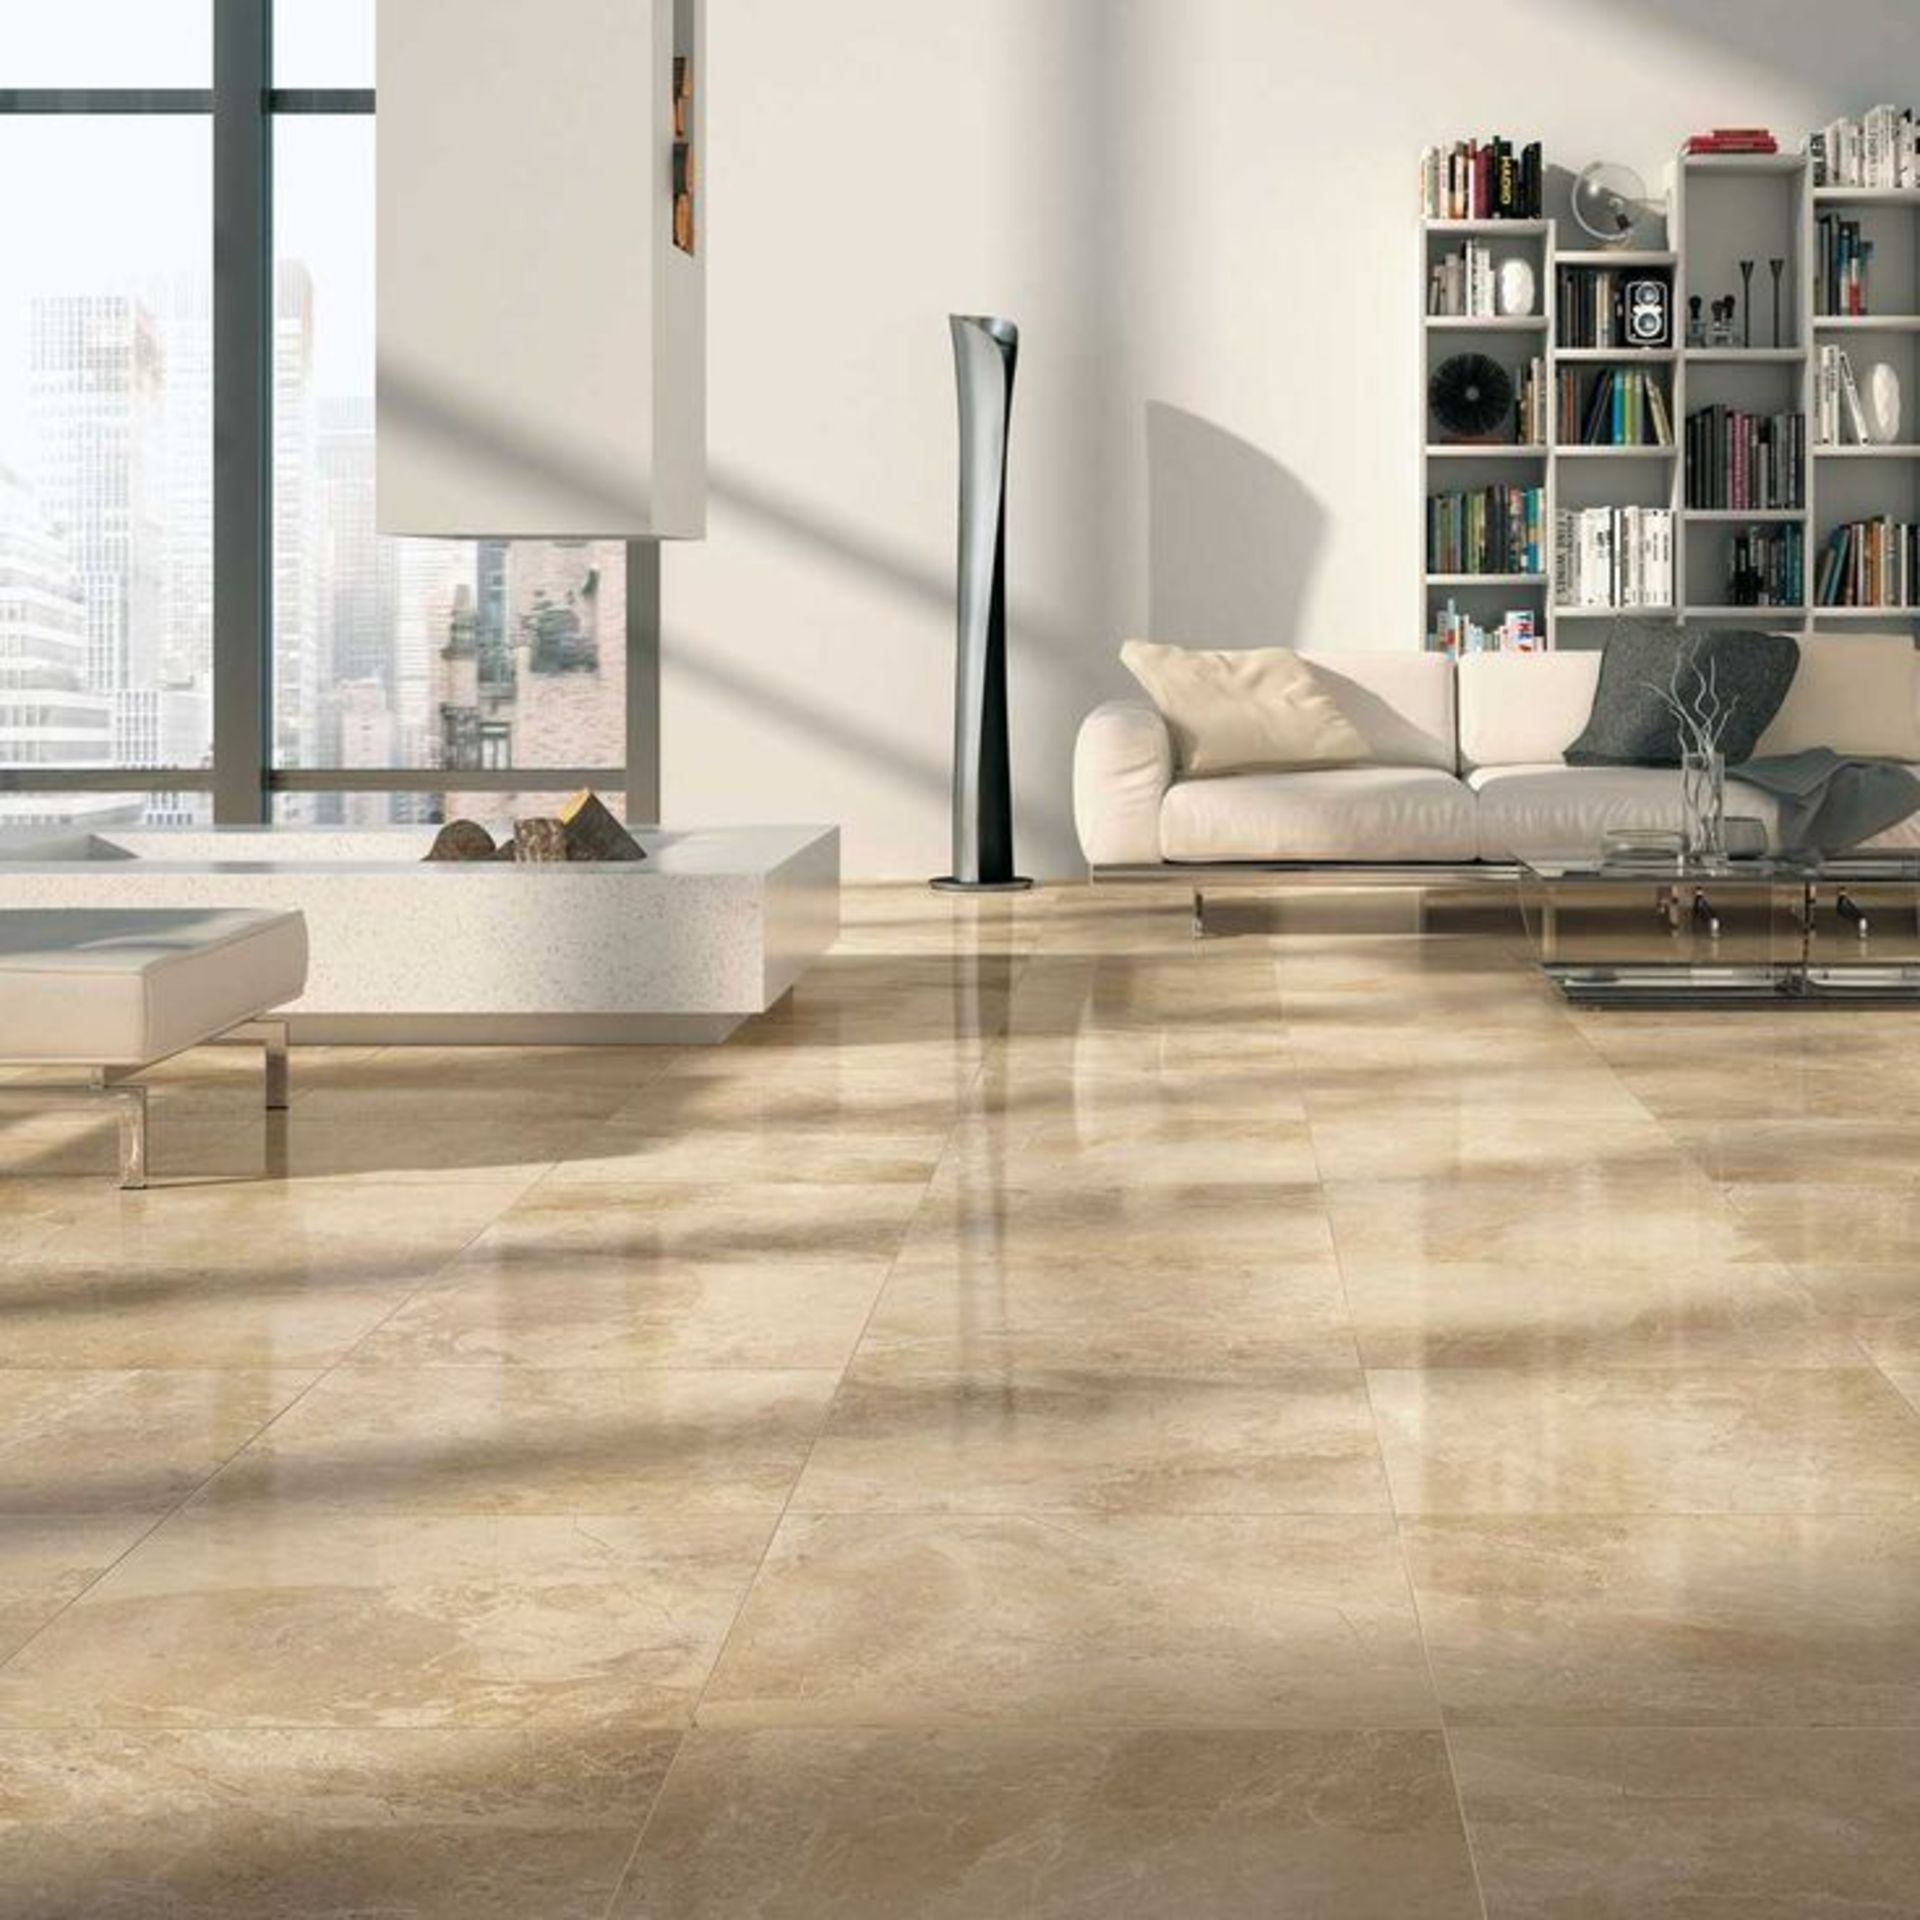 NEW 8.76 Square Meters of Imola Beige Wall and Floor Tiles. 605x605mm per tile, 10mm thick. T...